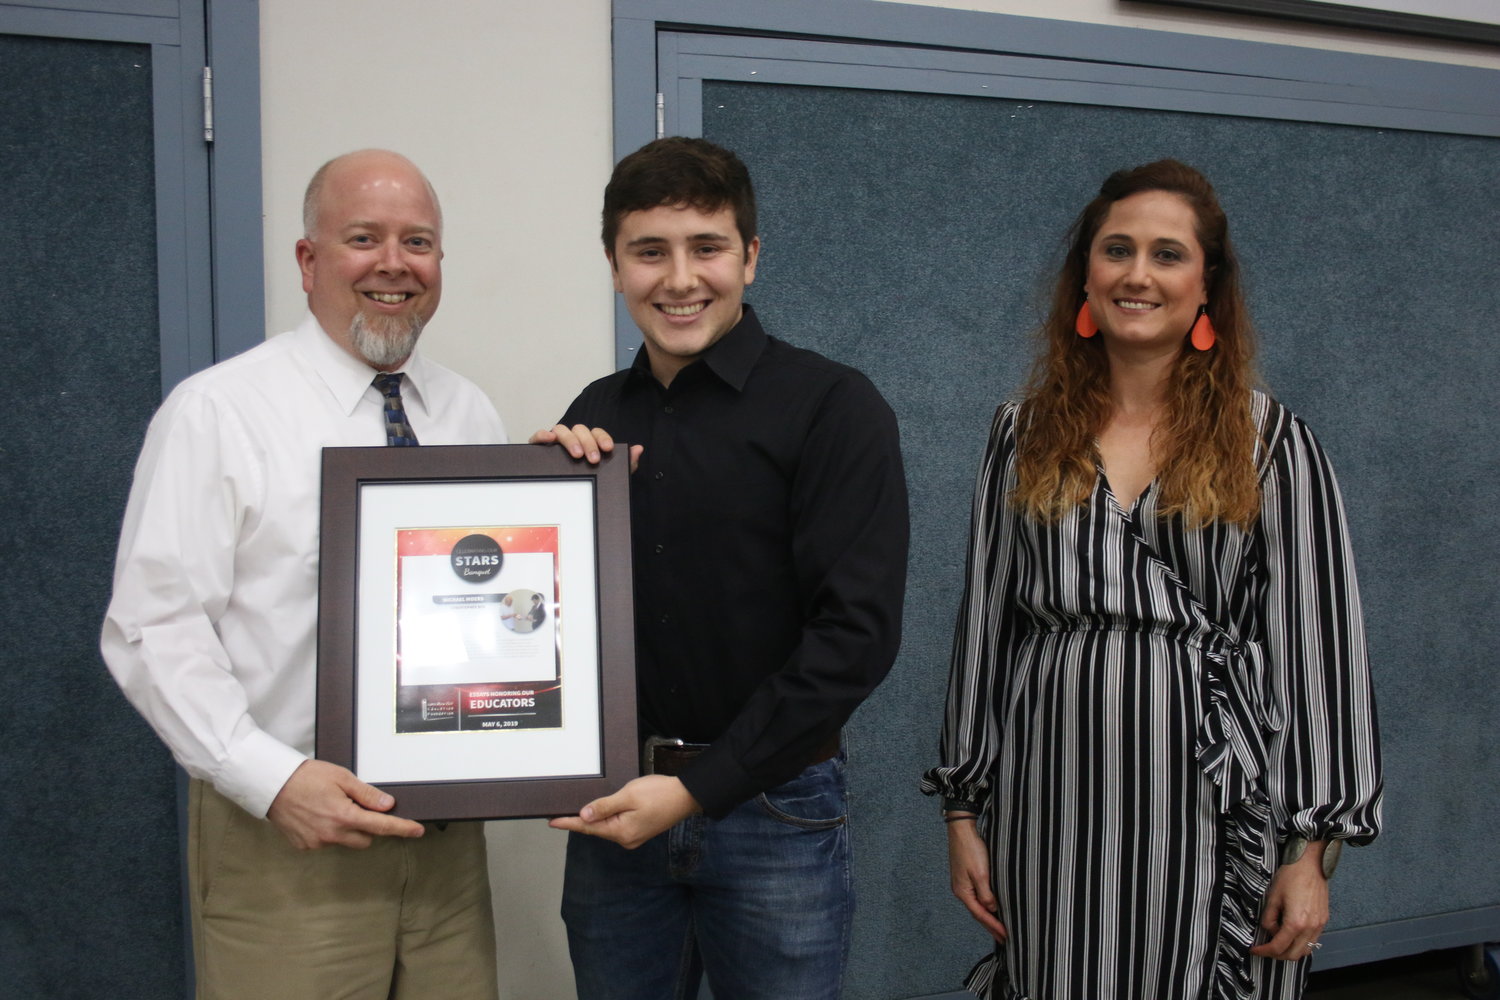 Christopher Box recognized Michael Moers due to his “undying pursuit of greatness and unwavering believe that every student at Gonzales High School can become more than they realize.”